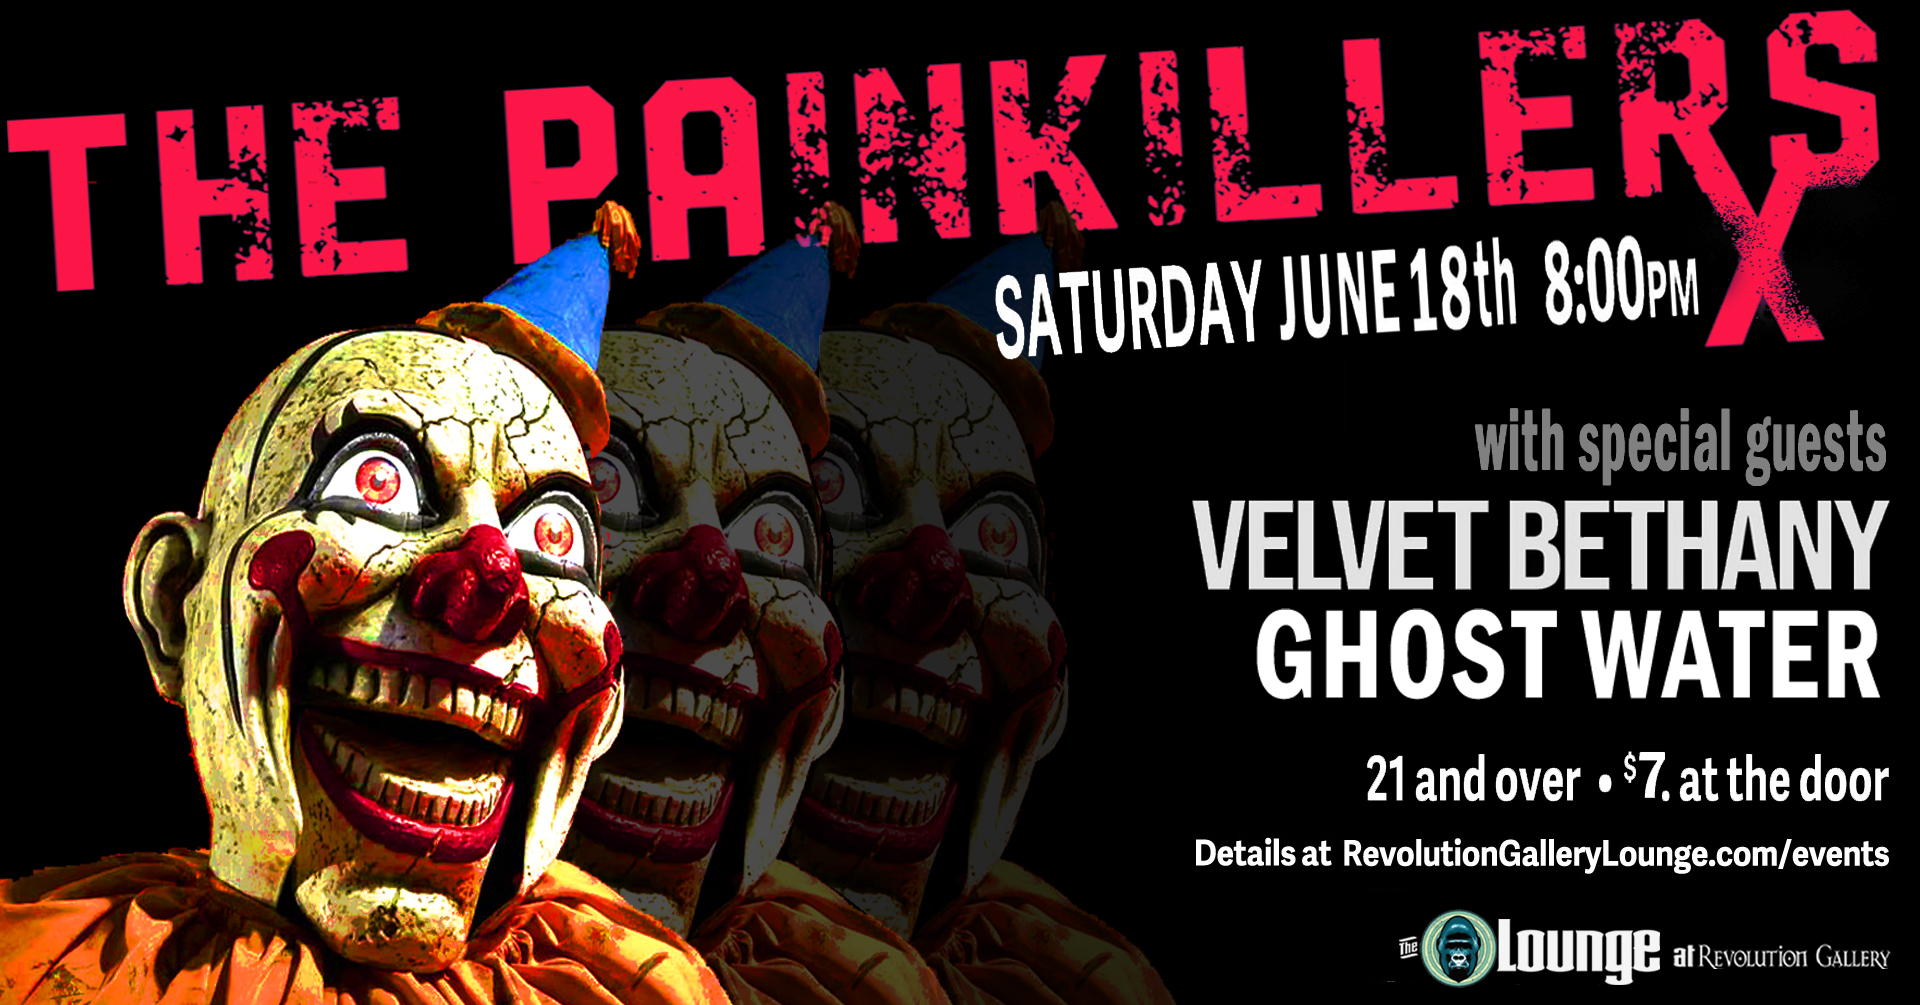 the_painkillers_FB_BANNER_JUNE18th_realfinal